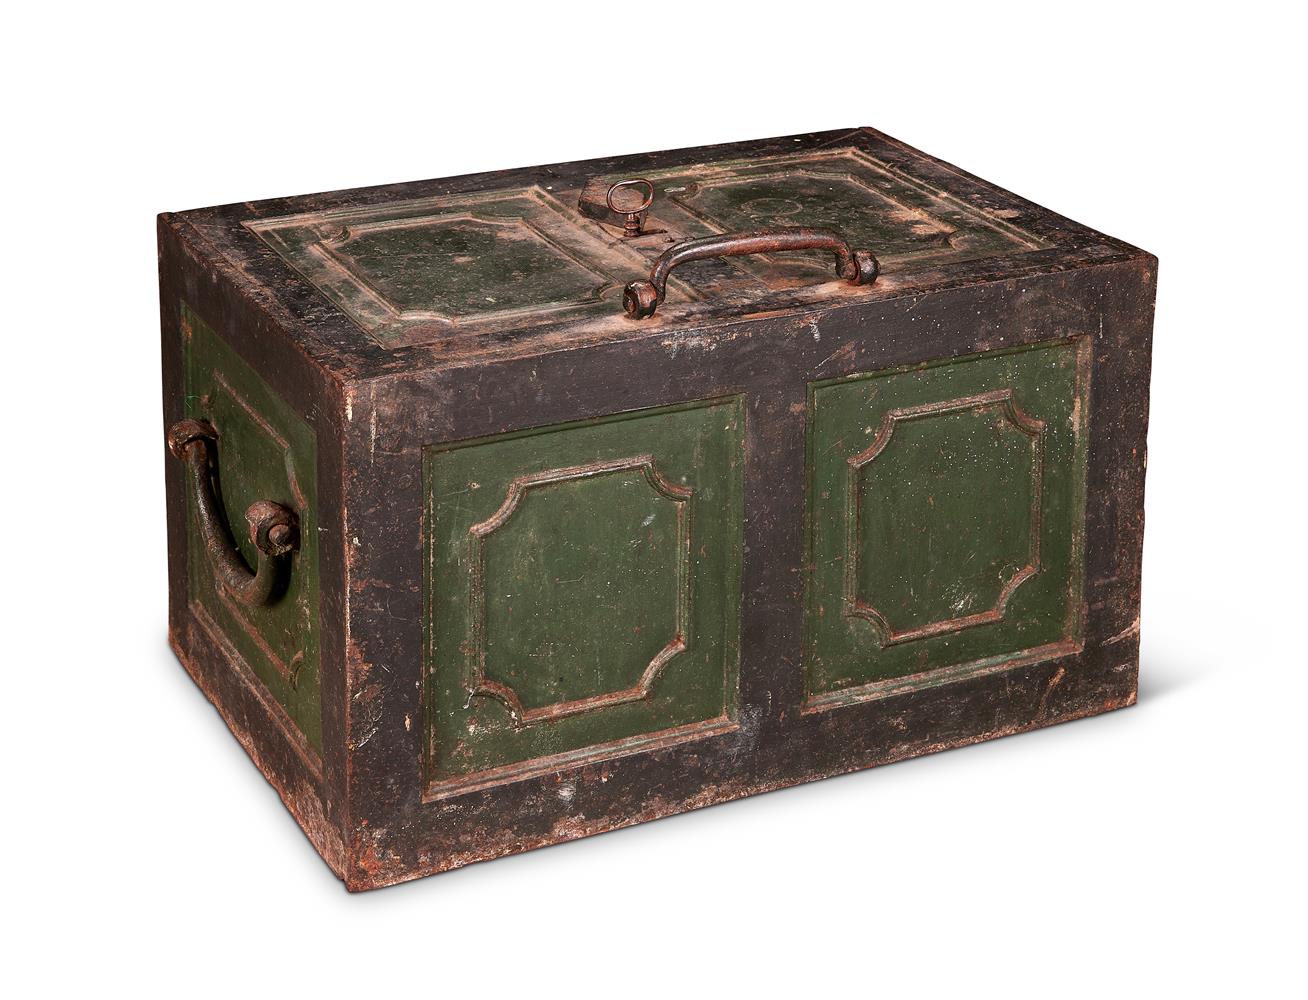 AN EARLY VICTORIAN IRON STRONG BOX, MID 19TH CENTURY